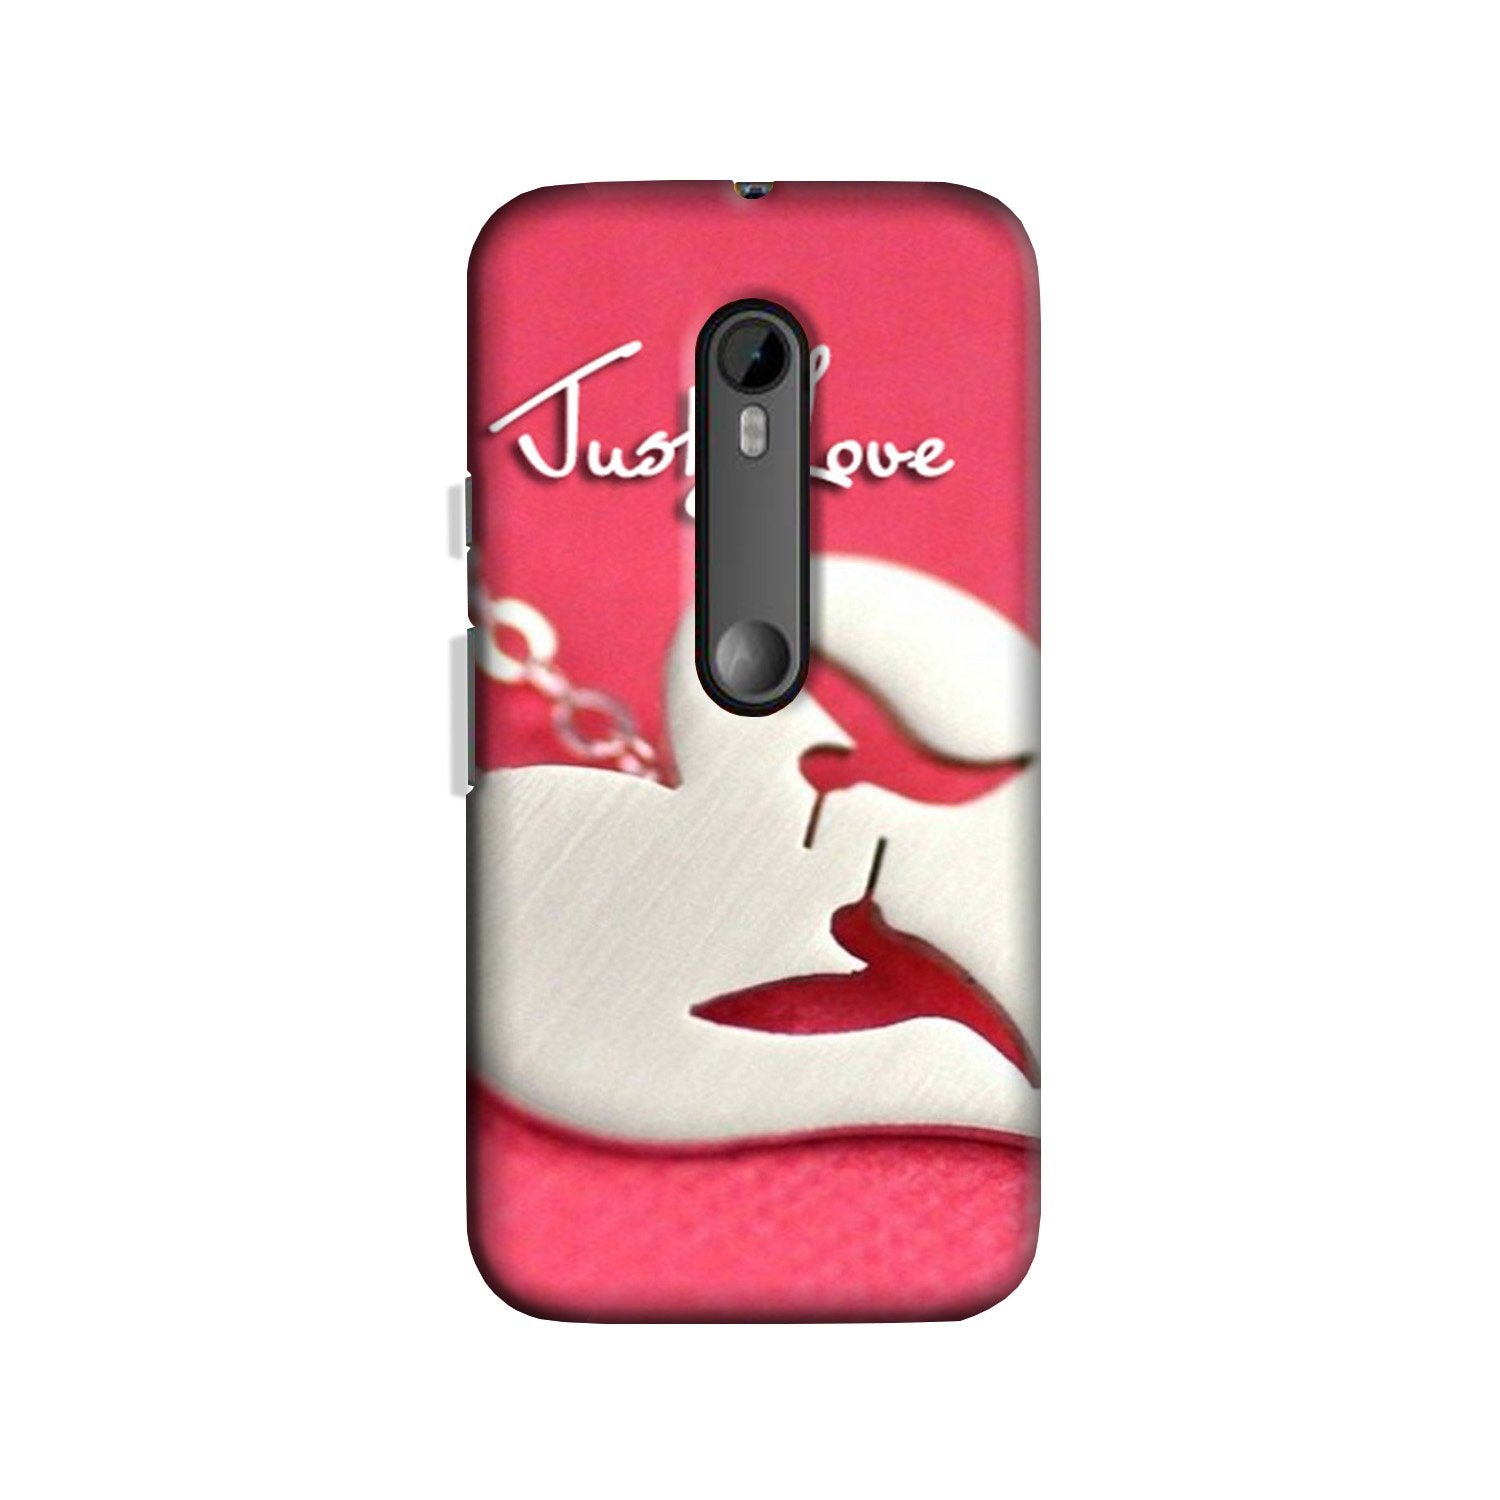 Just love Case for Moto G3